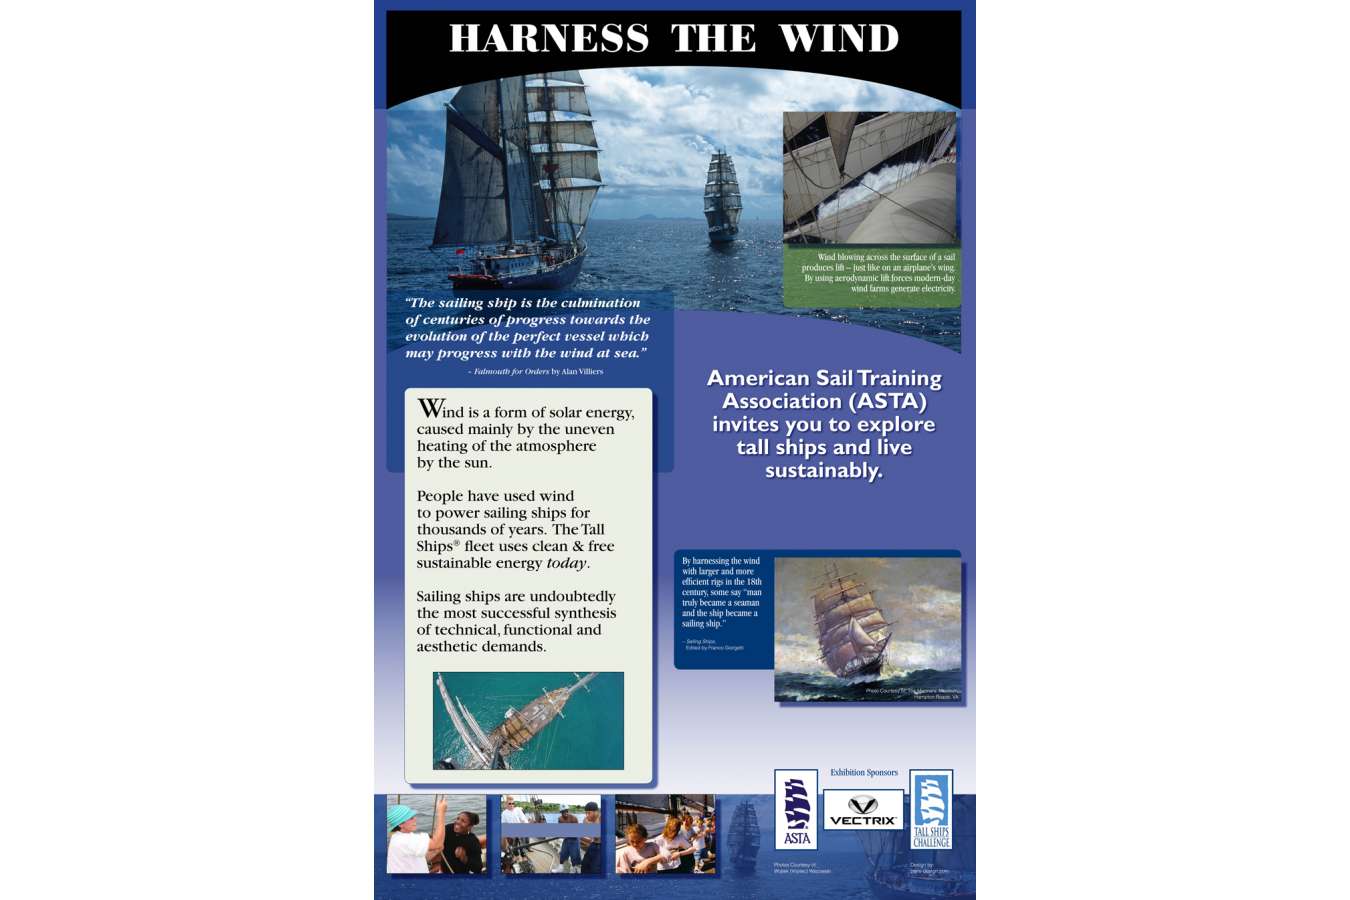 ASTA PF Harness : Wind Power moves the tall ships across the ocean